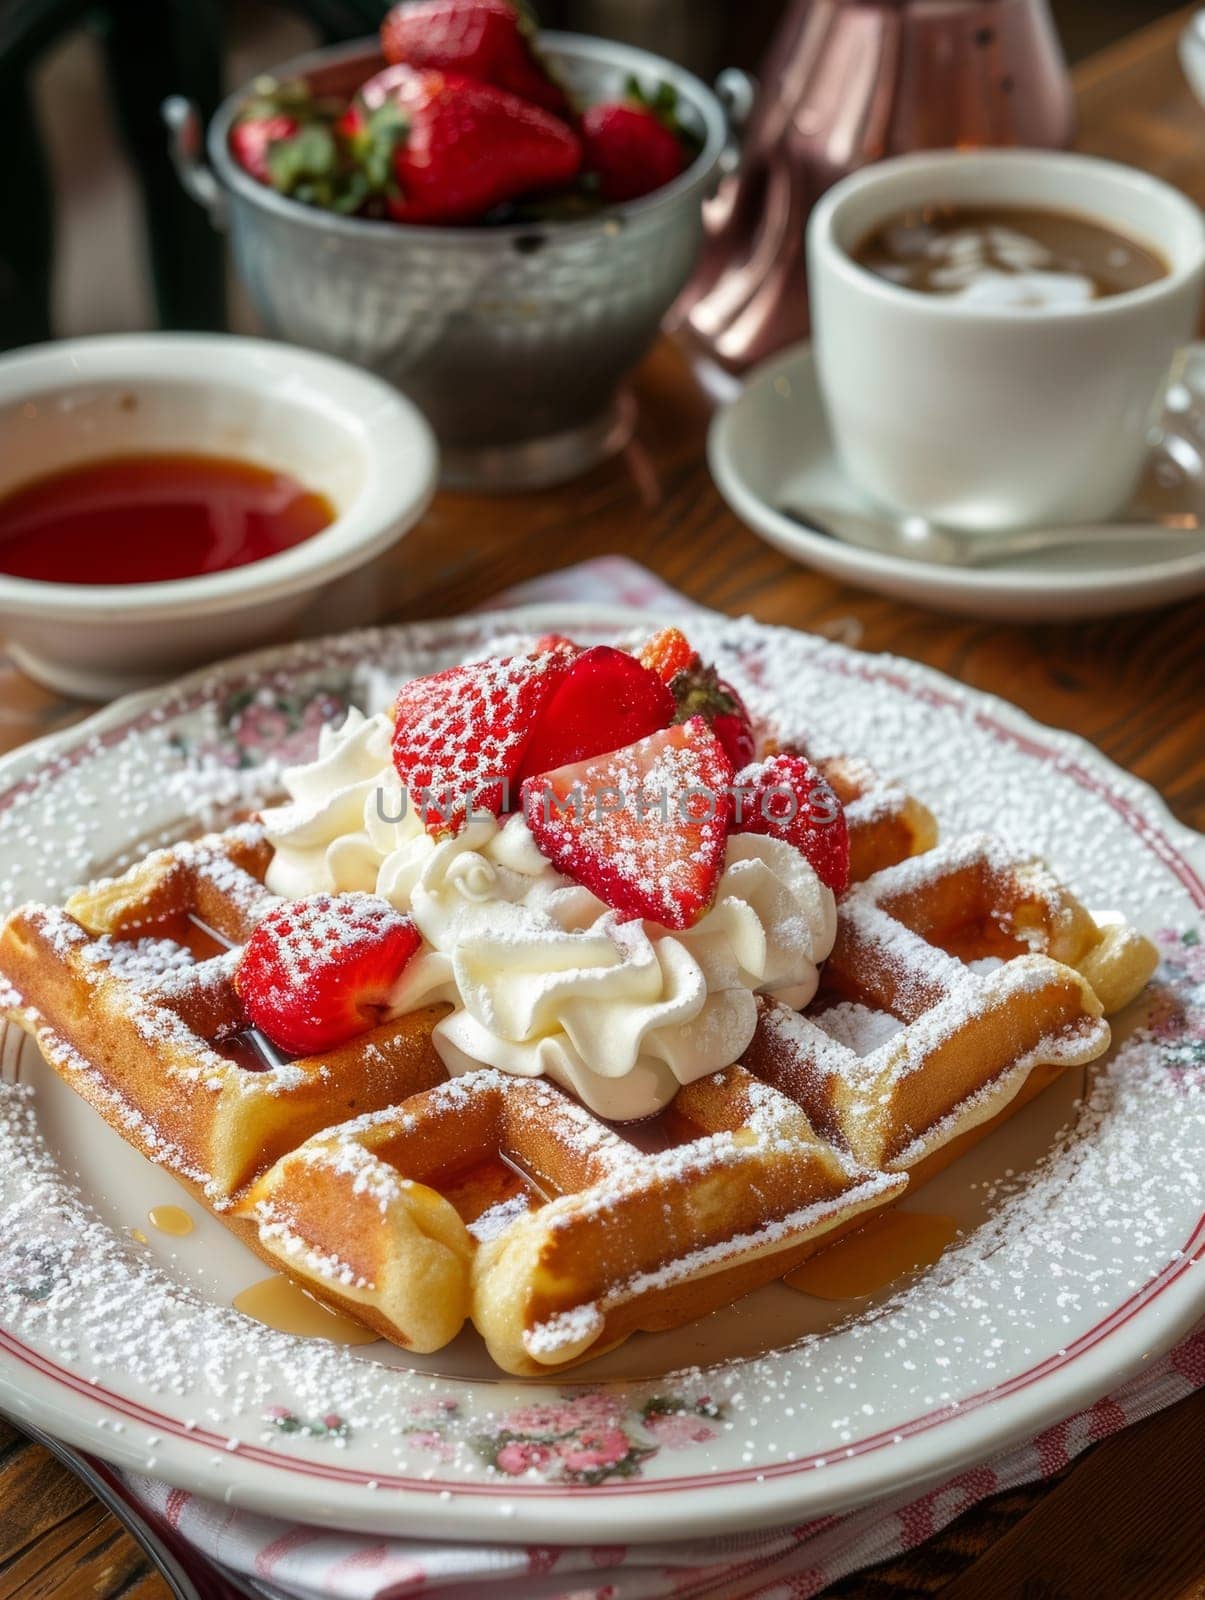 Delicate Belgian waffles served on a fine china plate, adorned with fresh strawberries and a generous dollop of whipped cream - a decadent and gourmet breakfast or dessert presentation